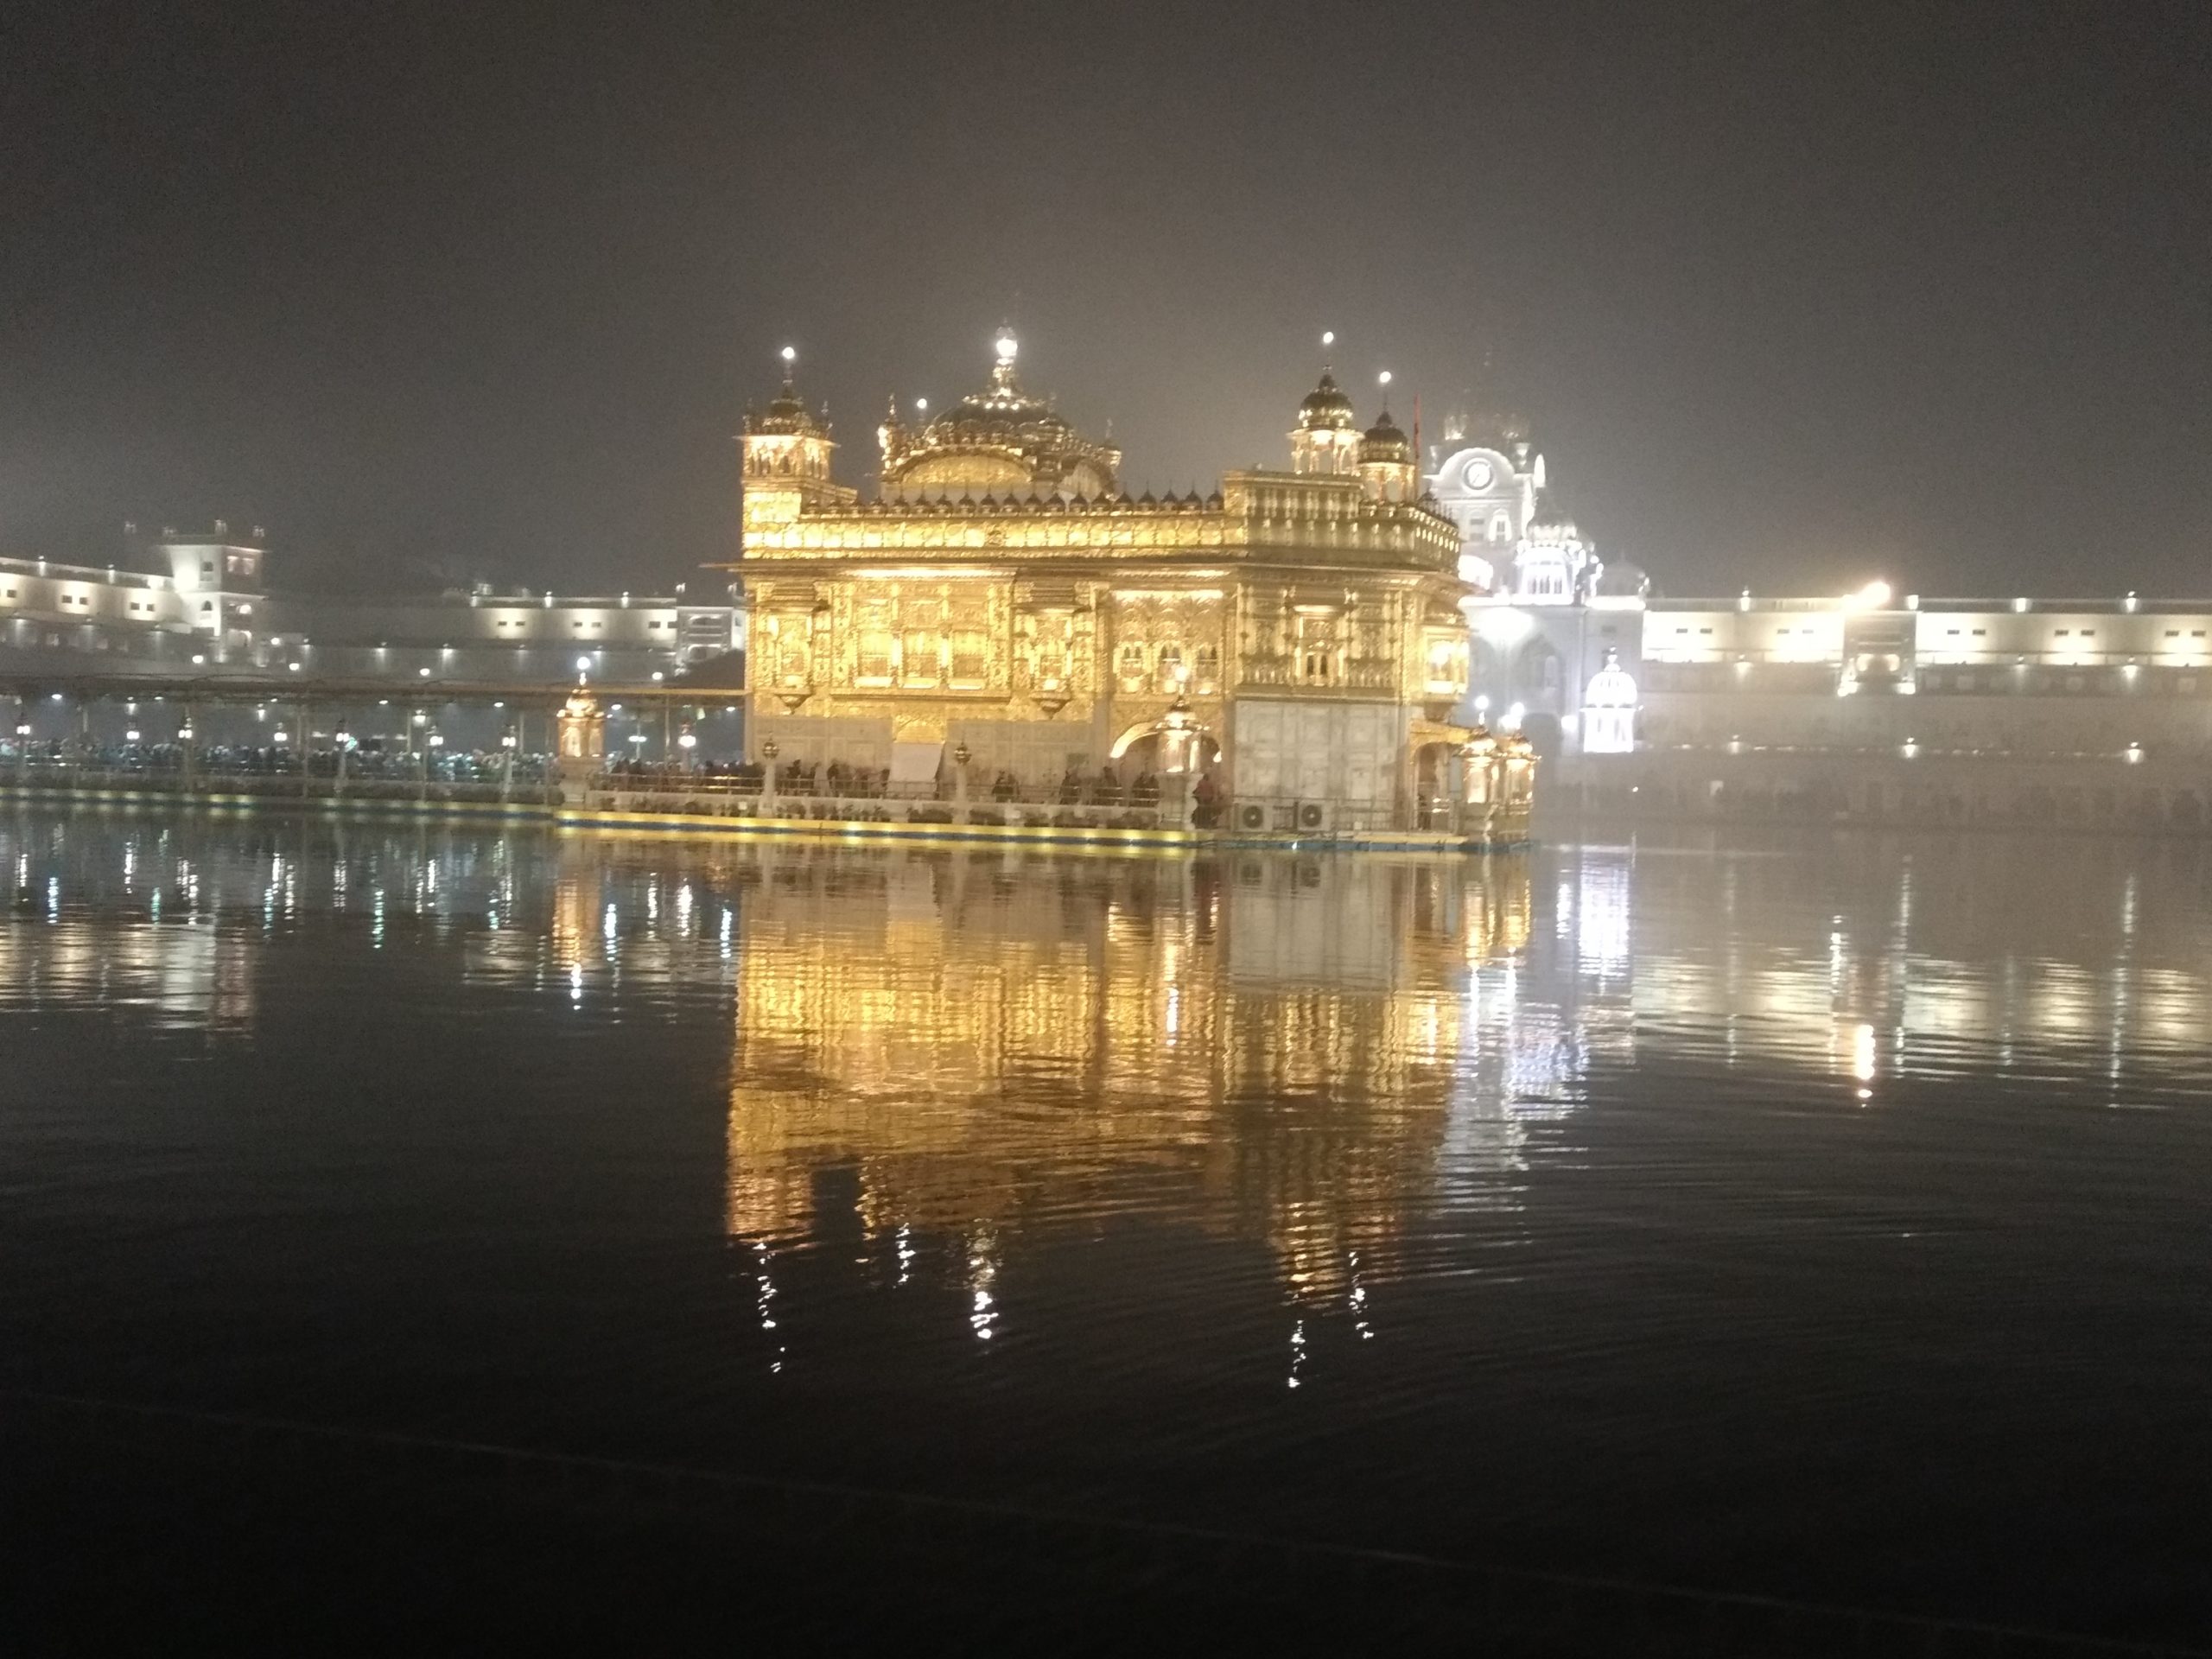 A trip to Amritsar - Blog about out trip to Amritsar and the sites visited  there